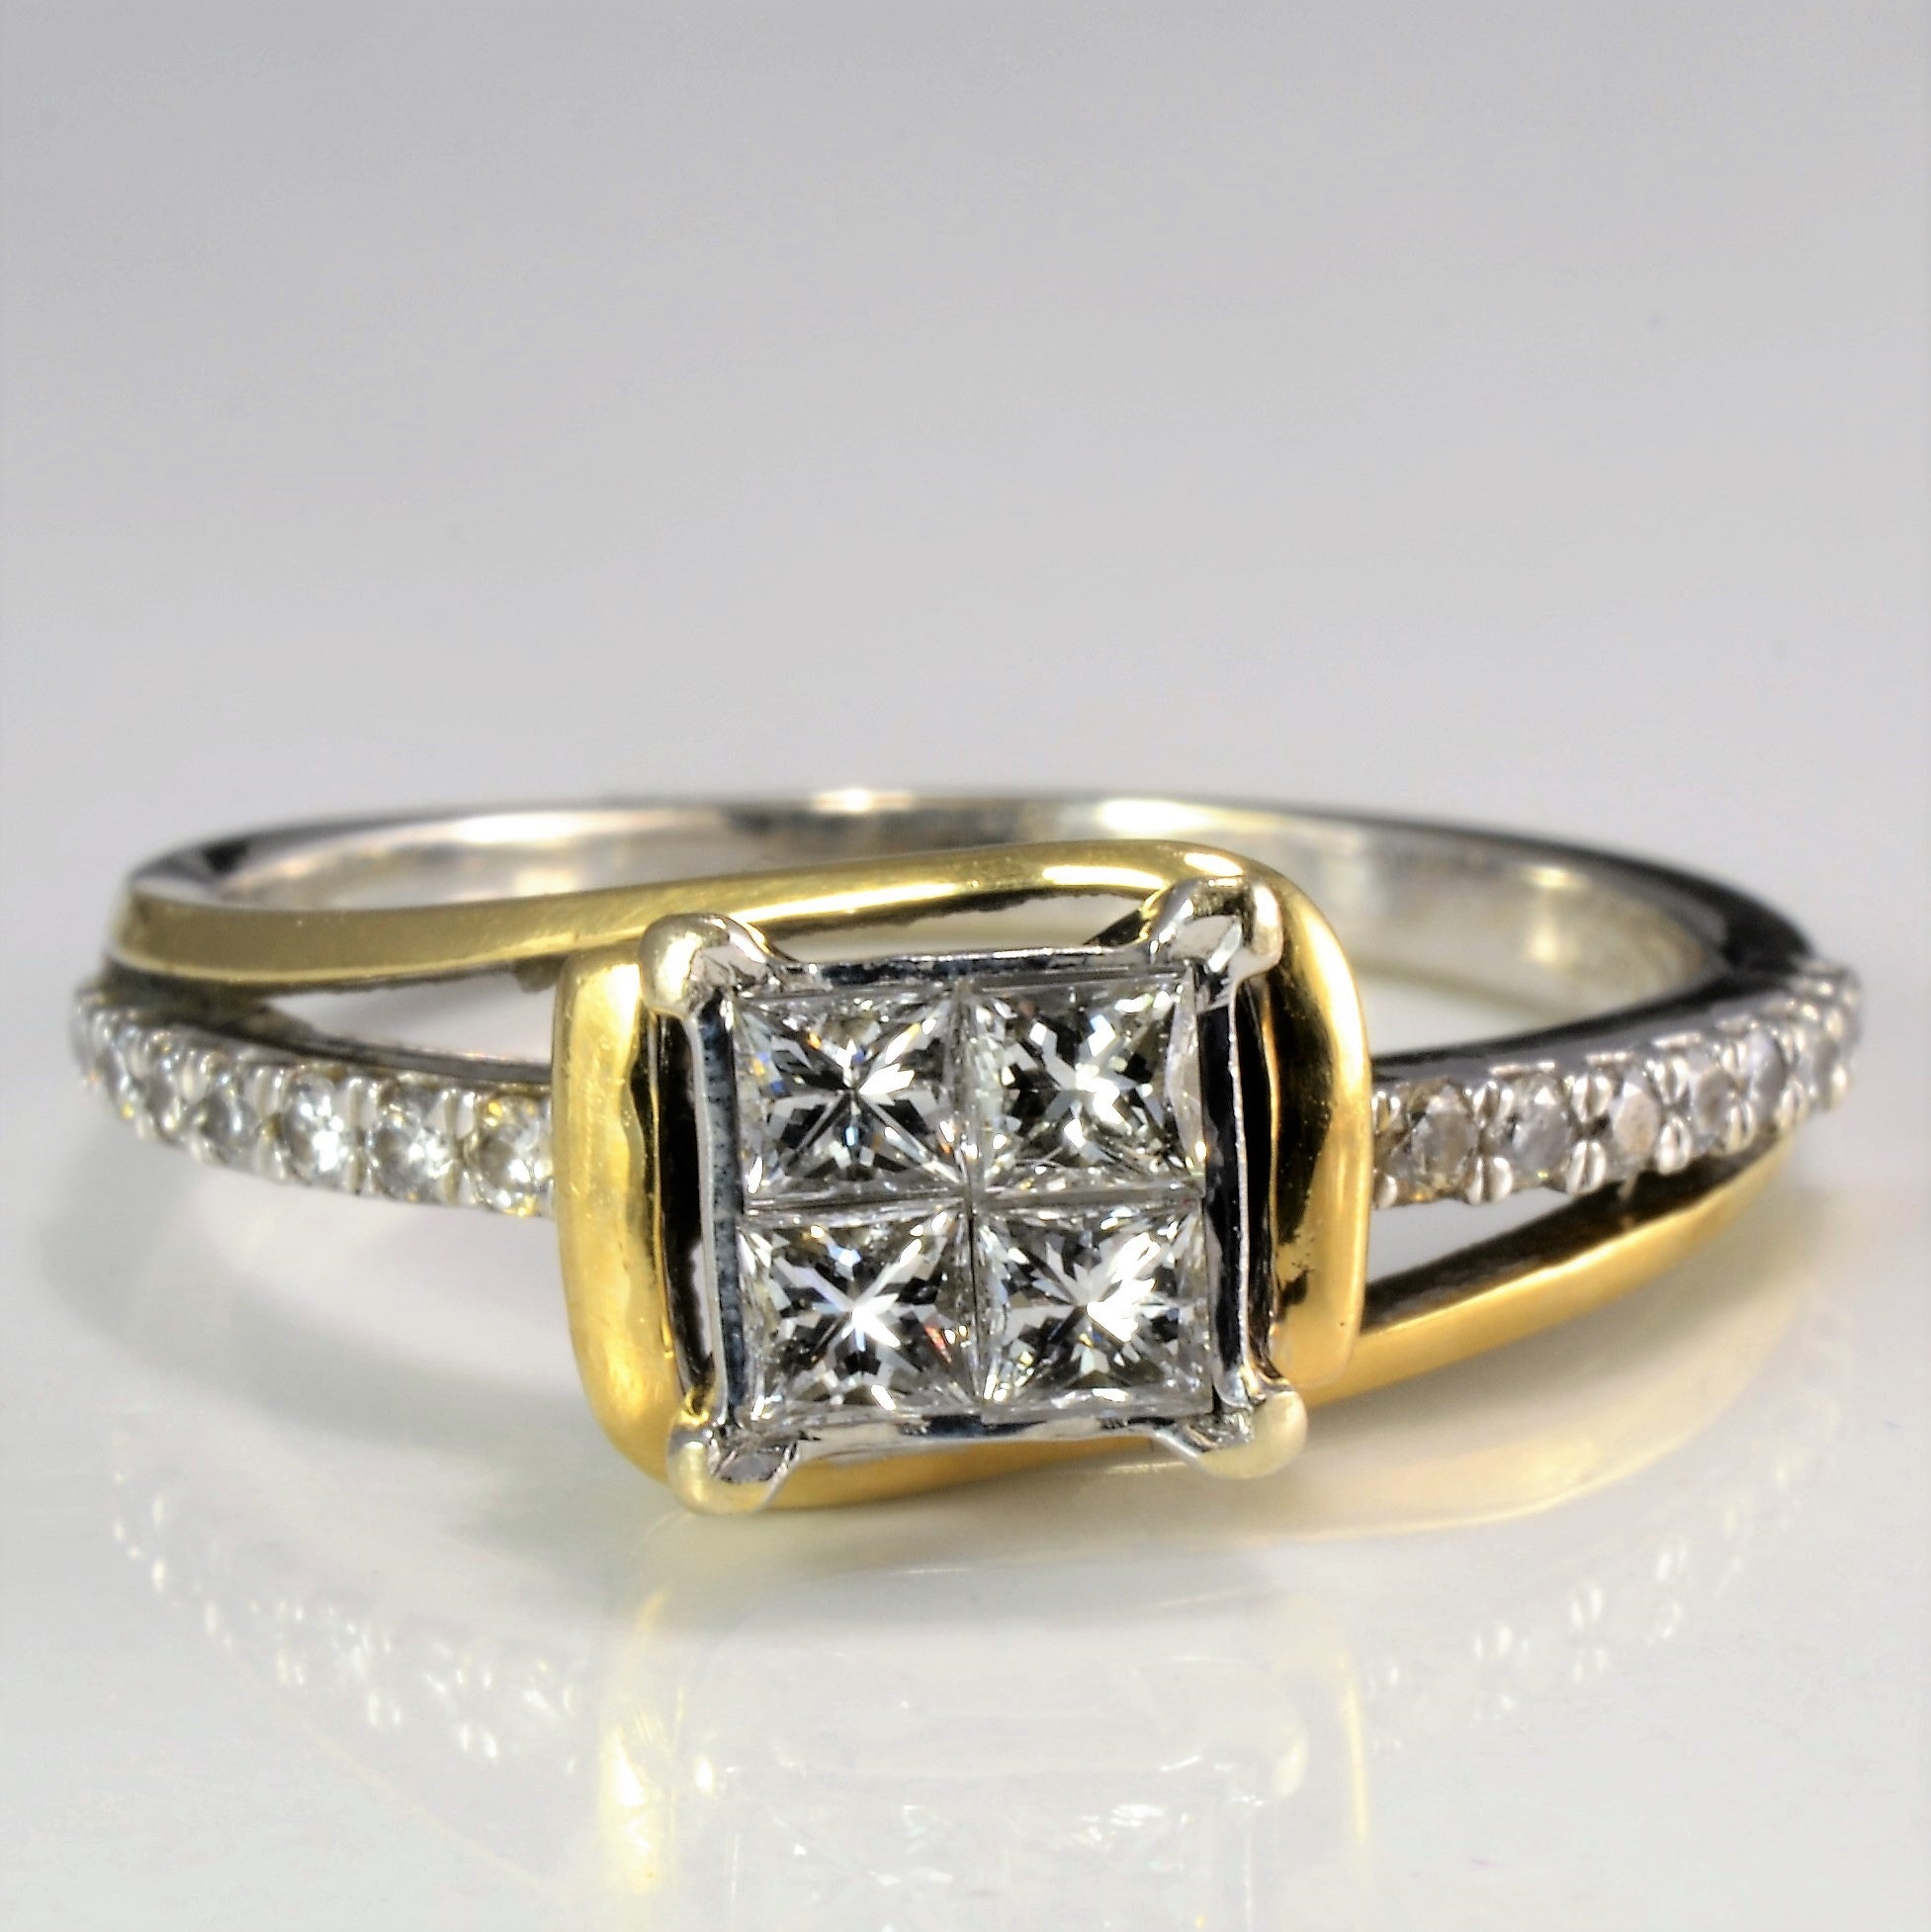 Two Tone Gold Bypass Multi Diamond Engagement Ring | 0.52 ctw, SZ 8 |